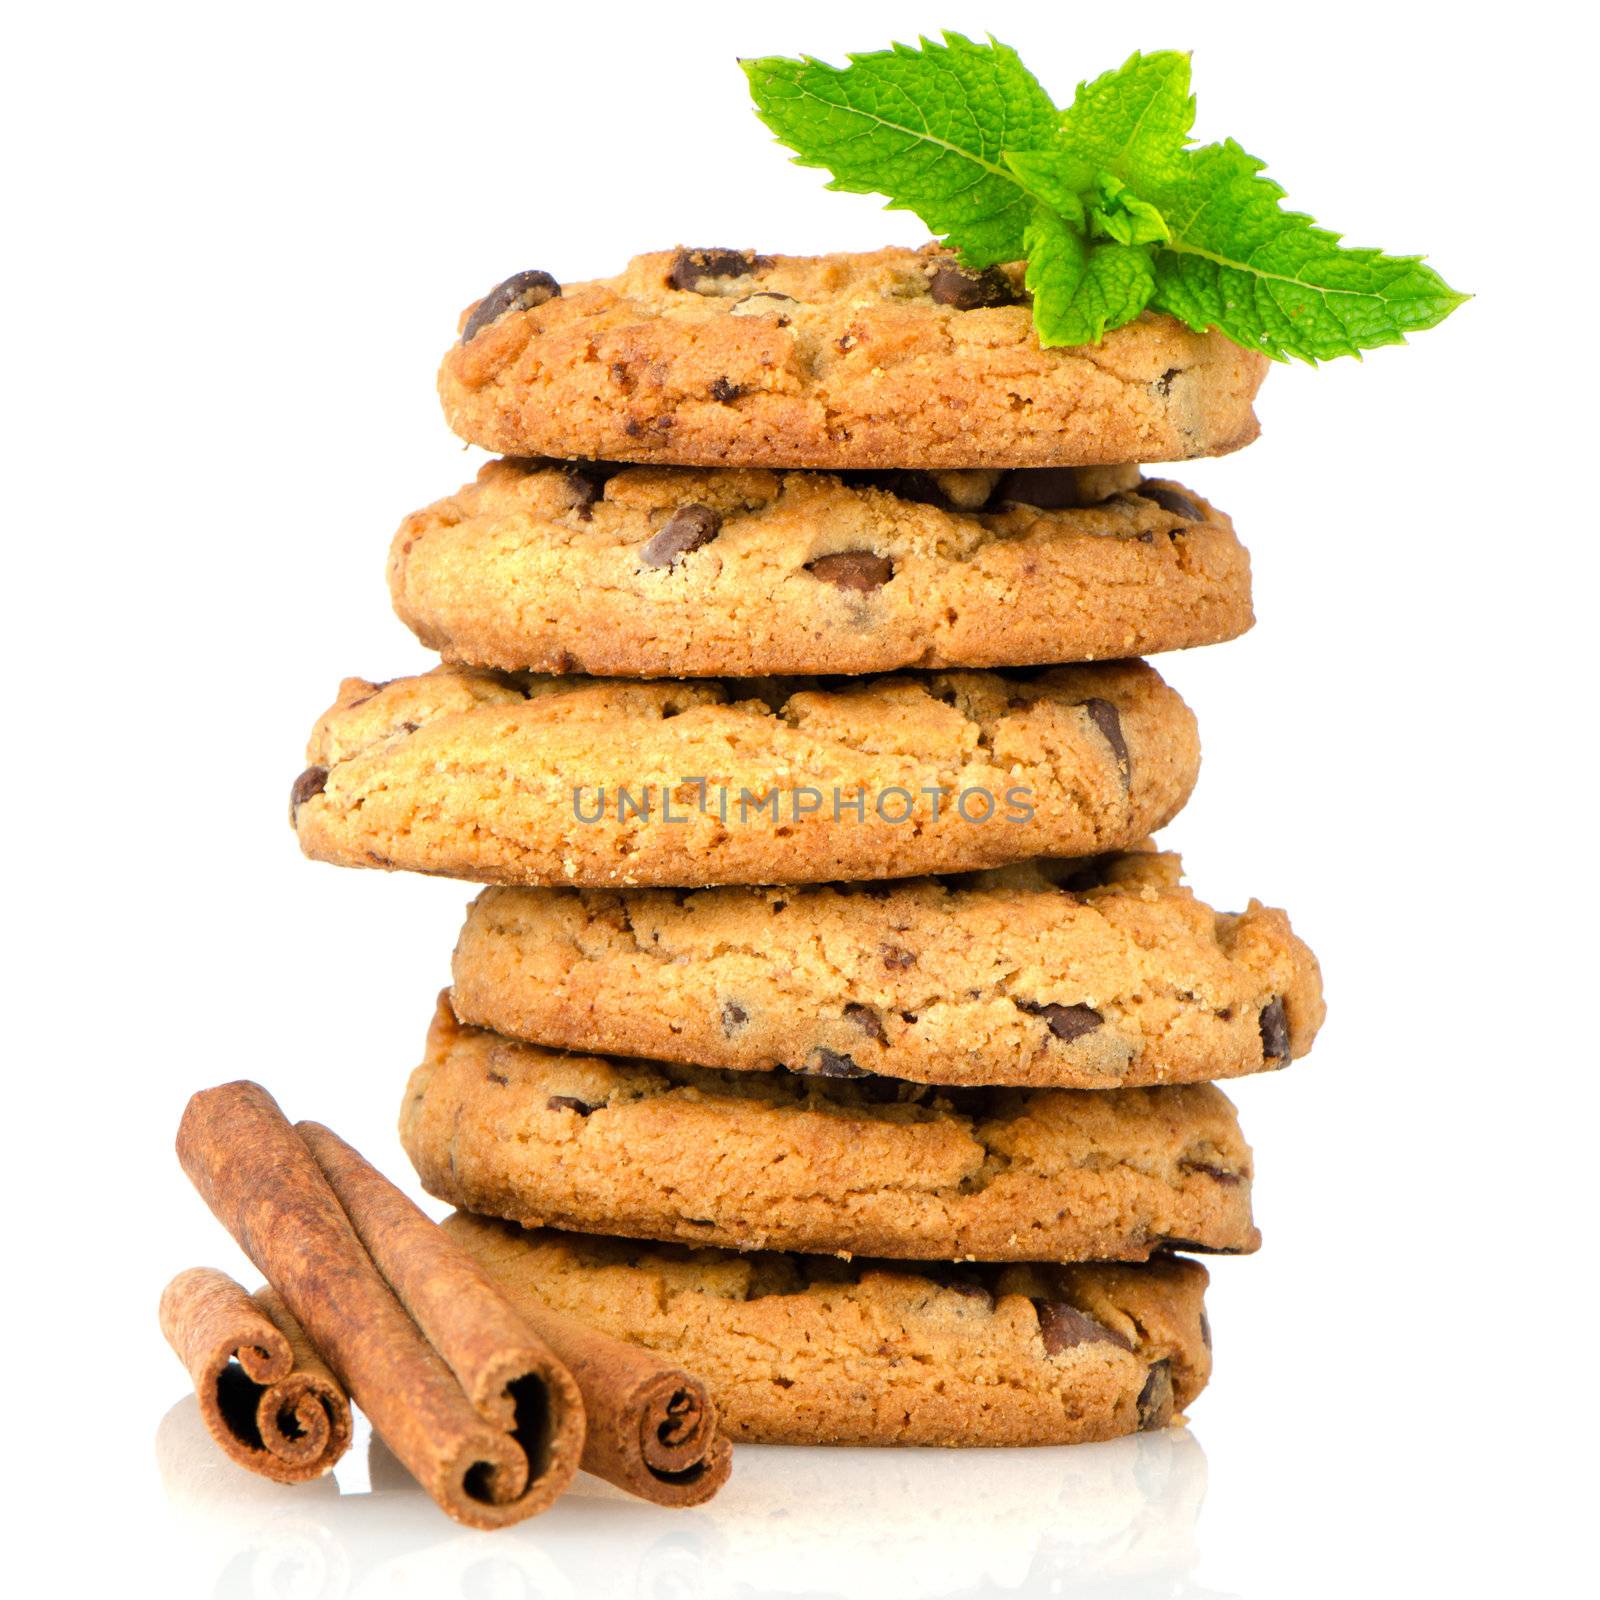 Fresh and tasty oat biscuits with cinnamon sticks on white background.